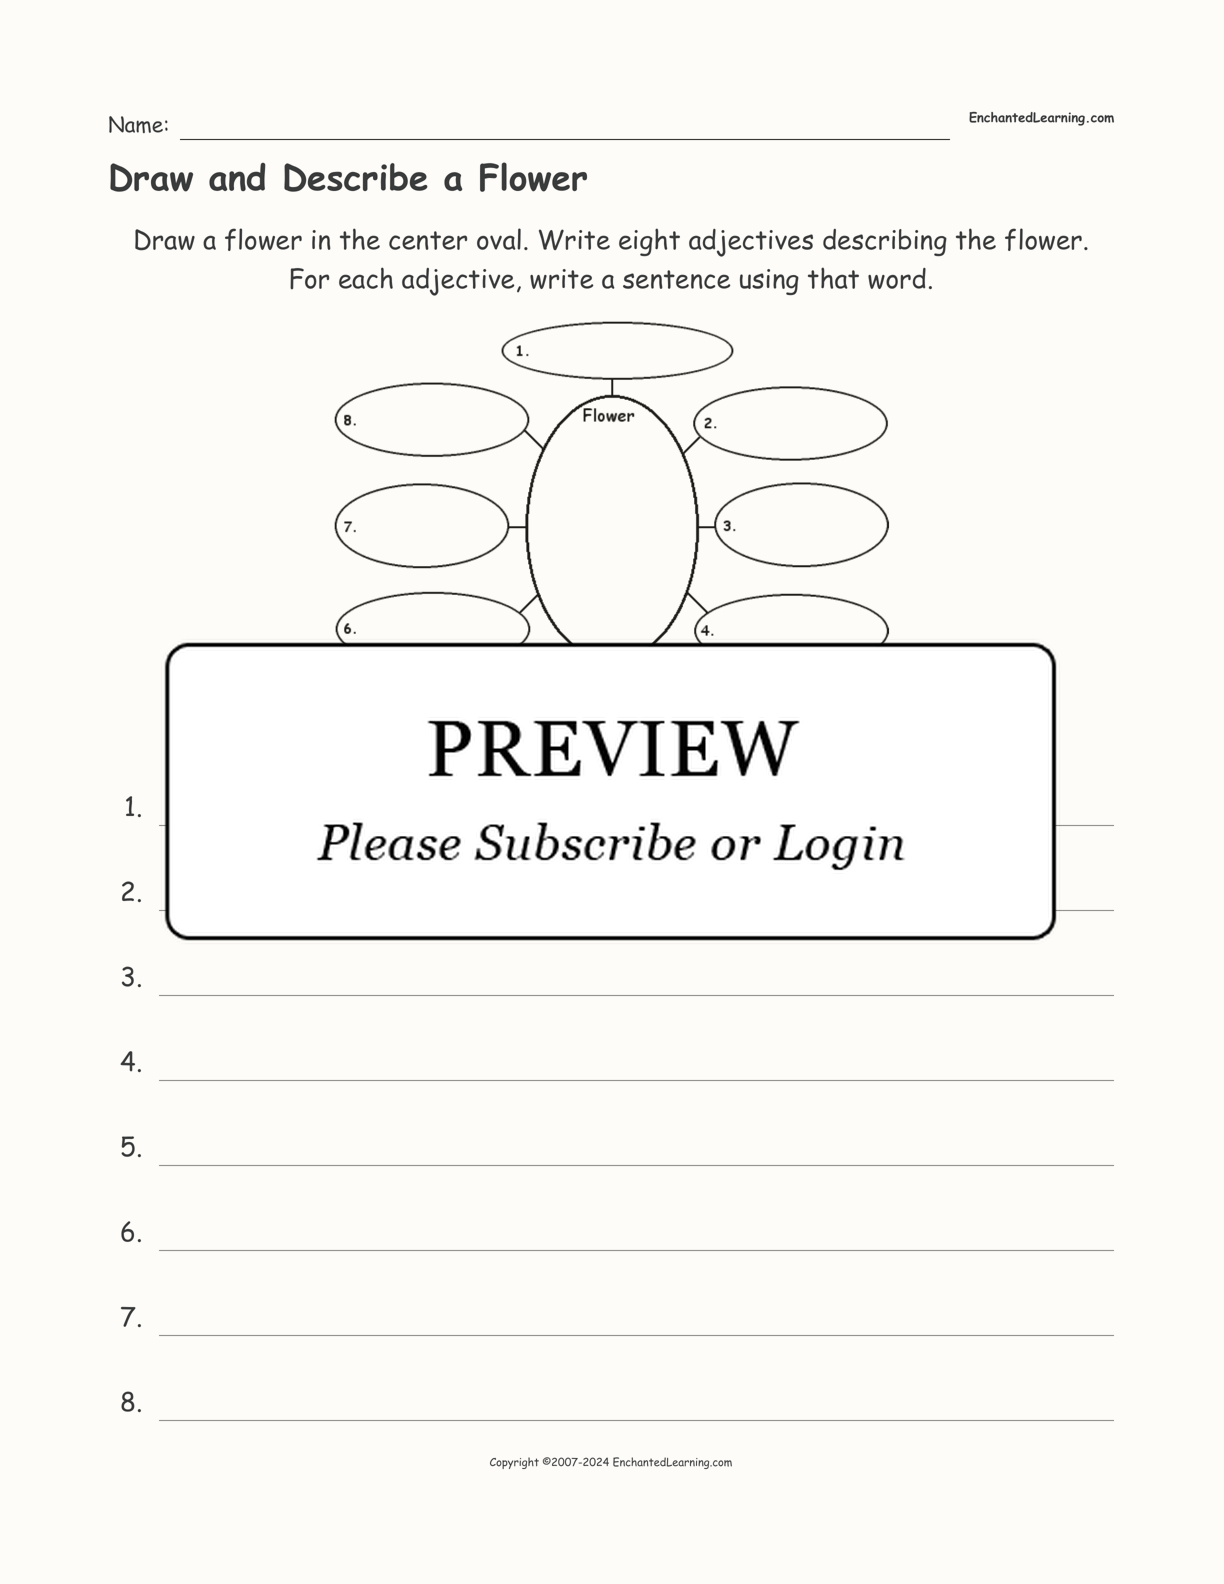 Draw and Describe a Flower interactive worksheet page 1